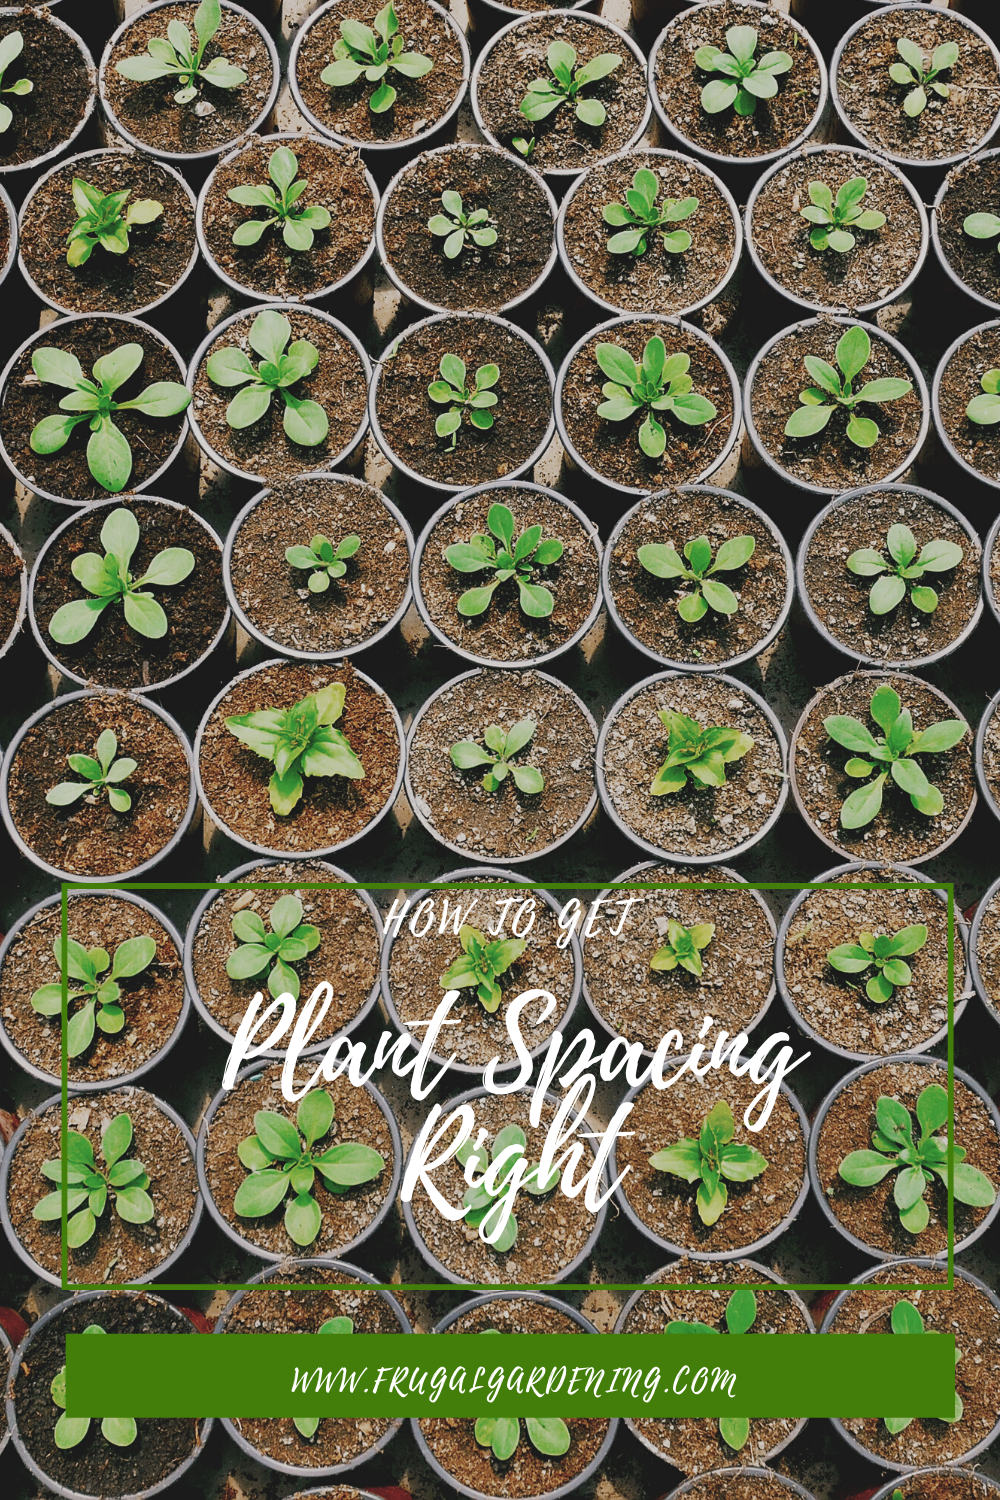 How To Get Plant Spacing Right